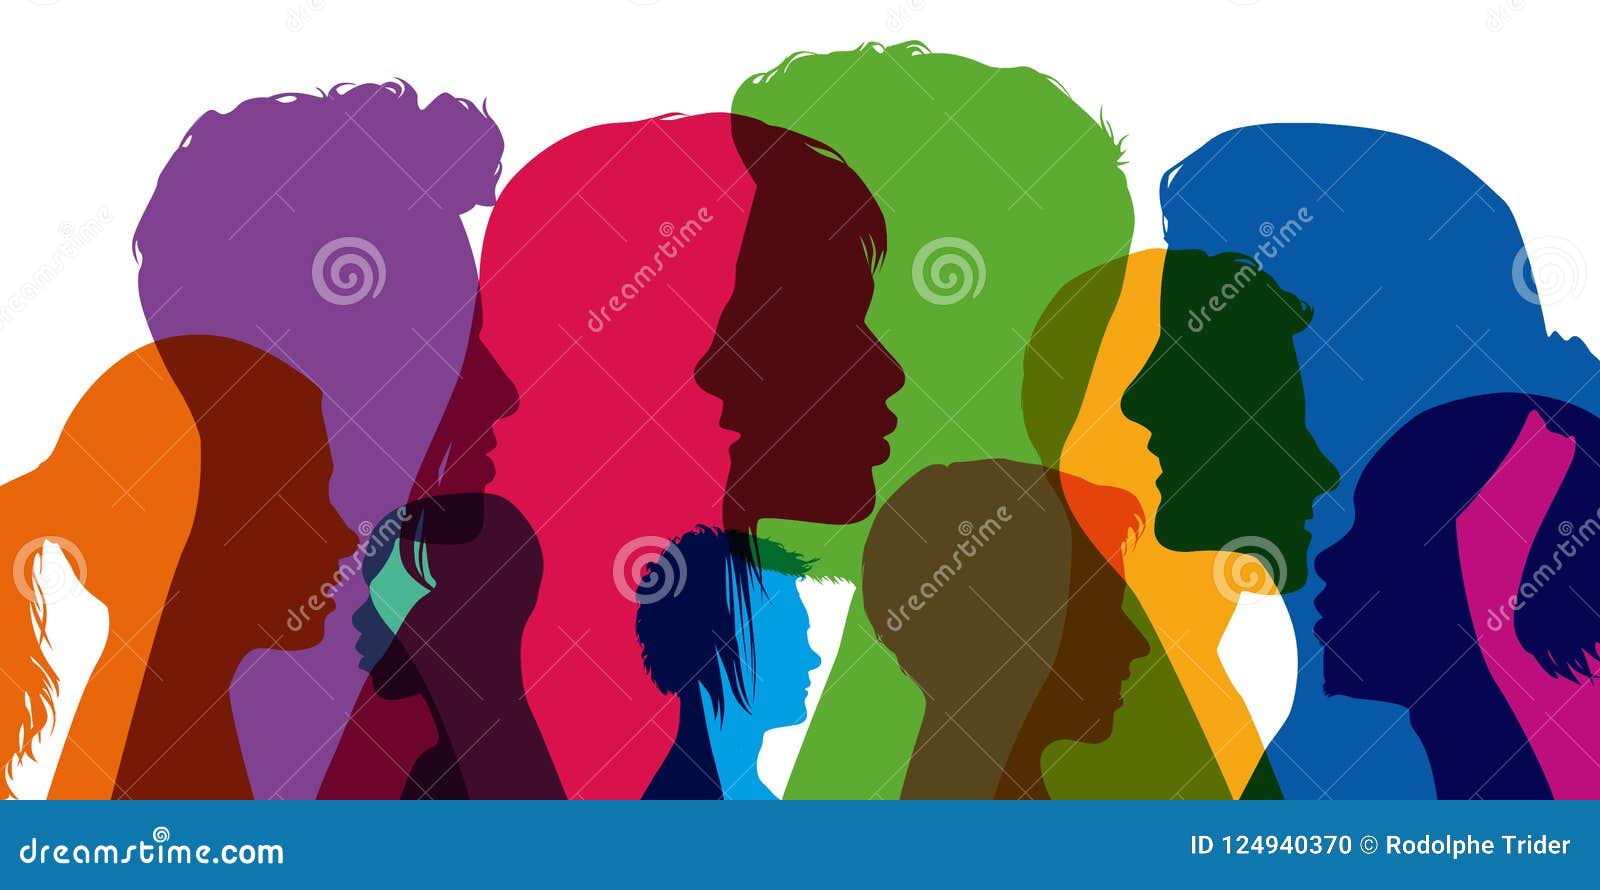 concept of diversity, with silhouettes in colors; showing different profiles of young men and women.